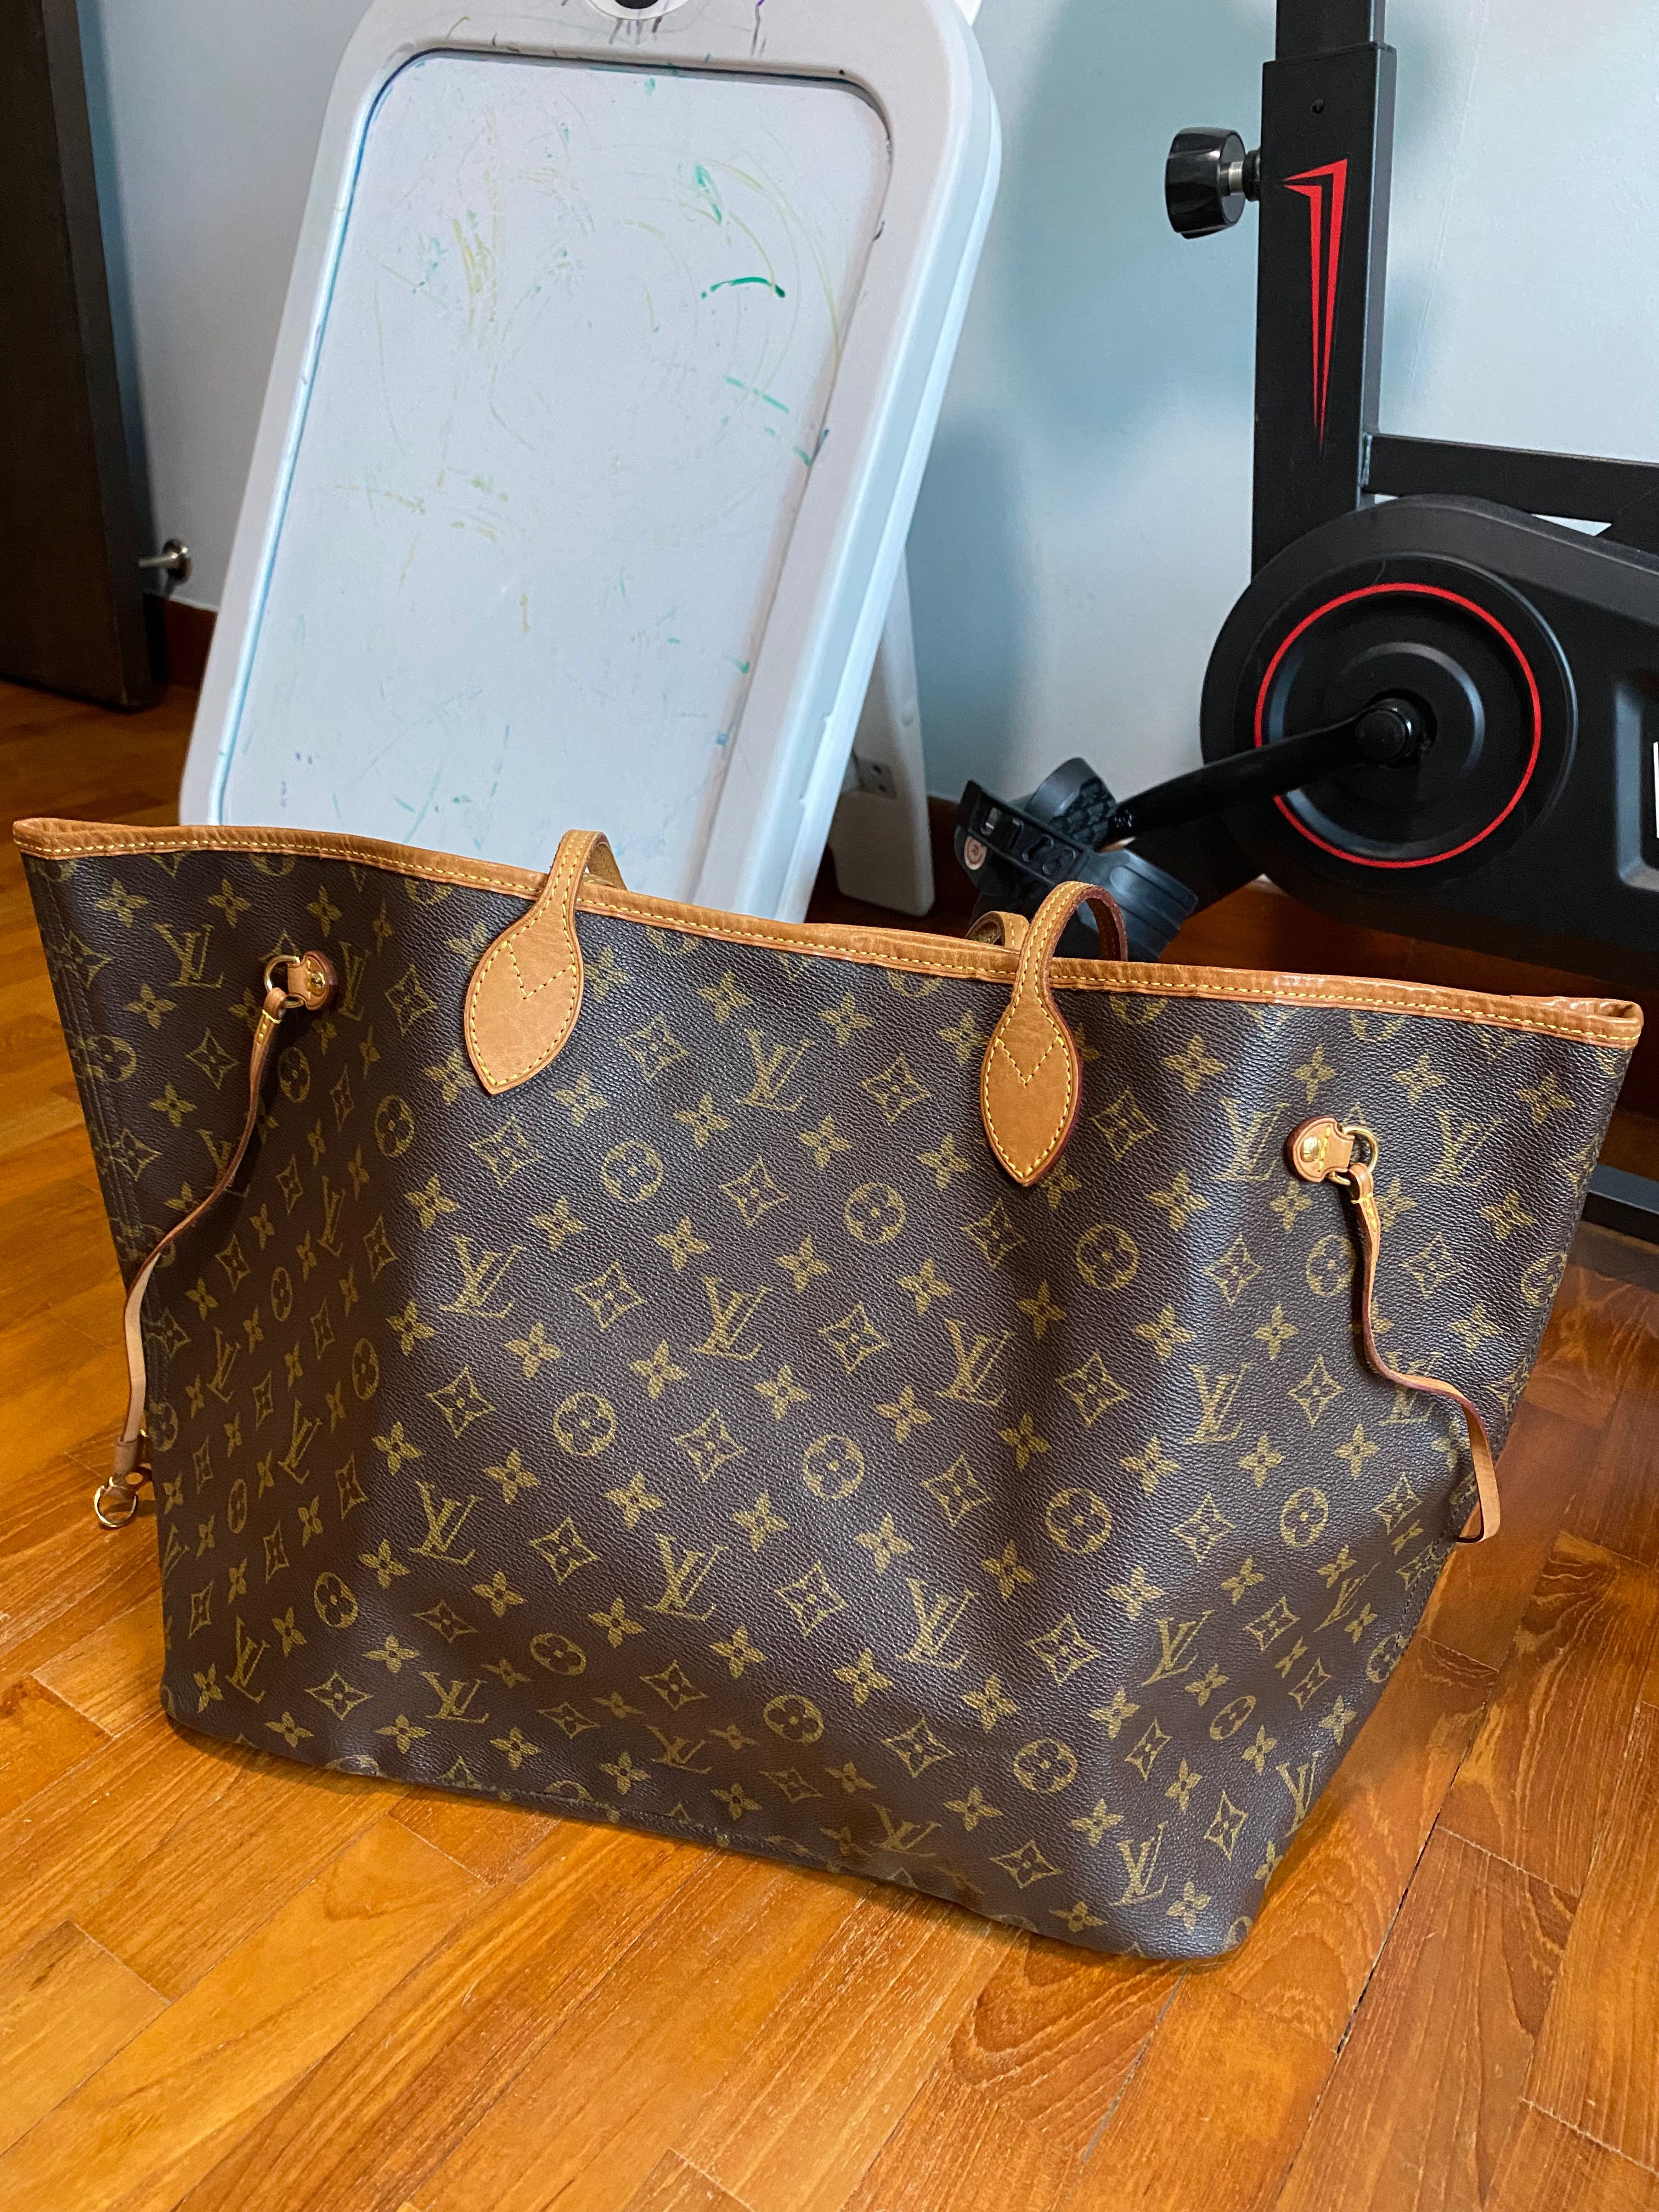 Louis Vuitton Neverfull GM (M40990) Monogram Beige Tote Bag with Bag and Box